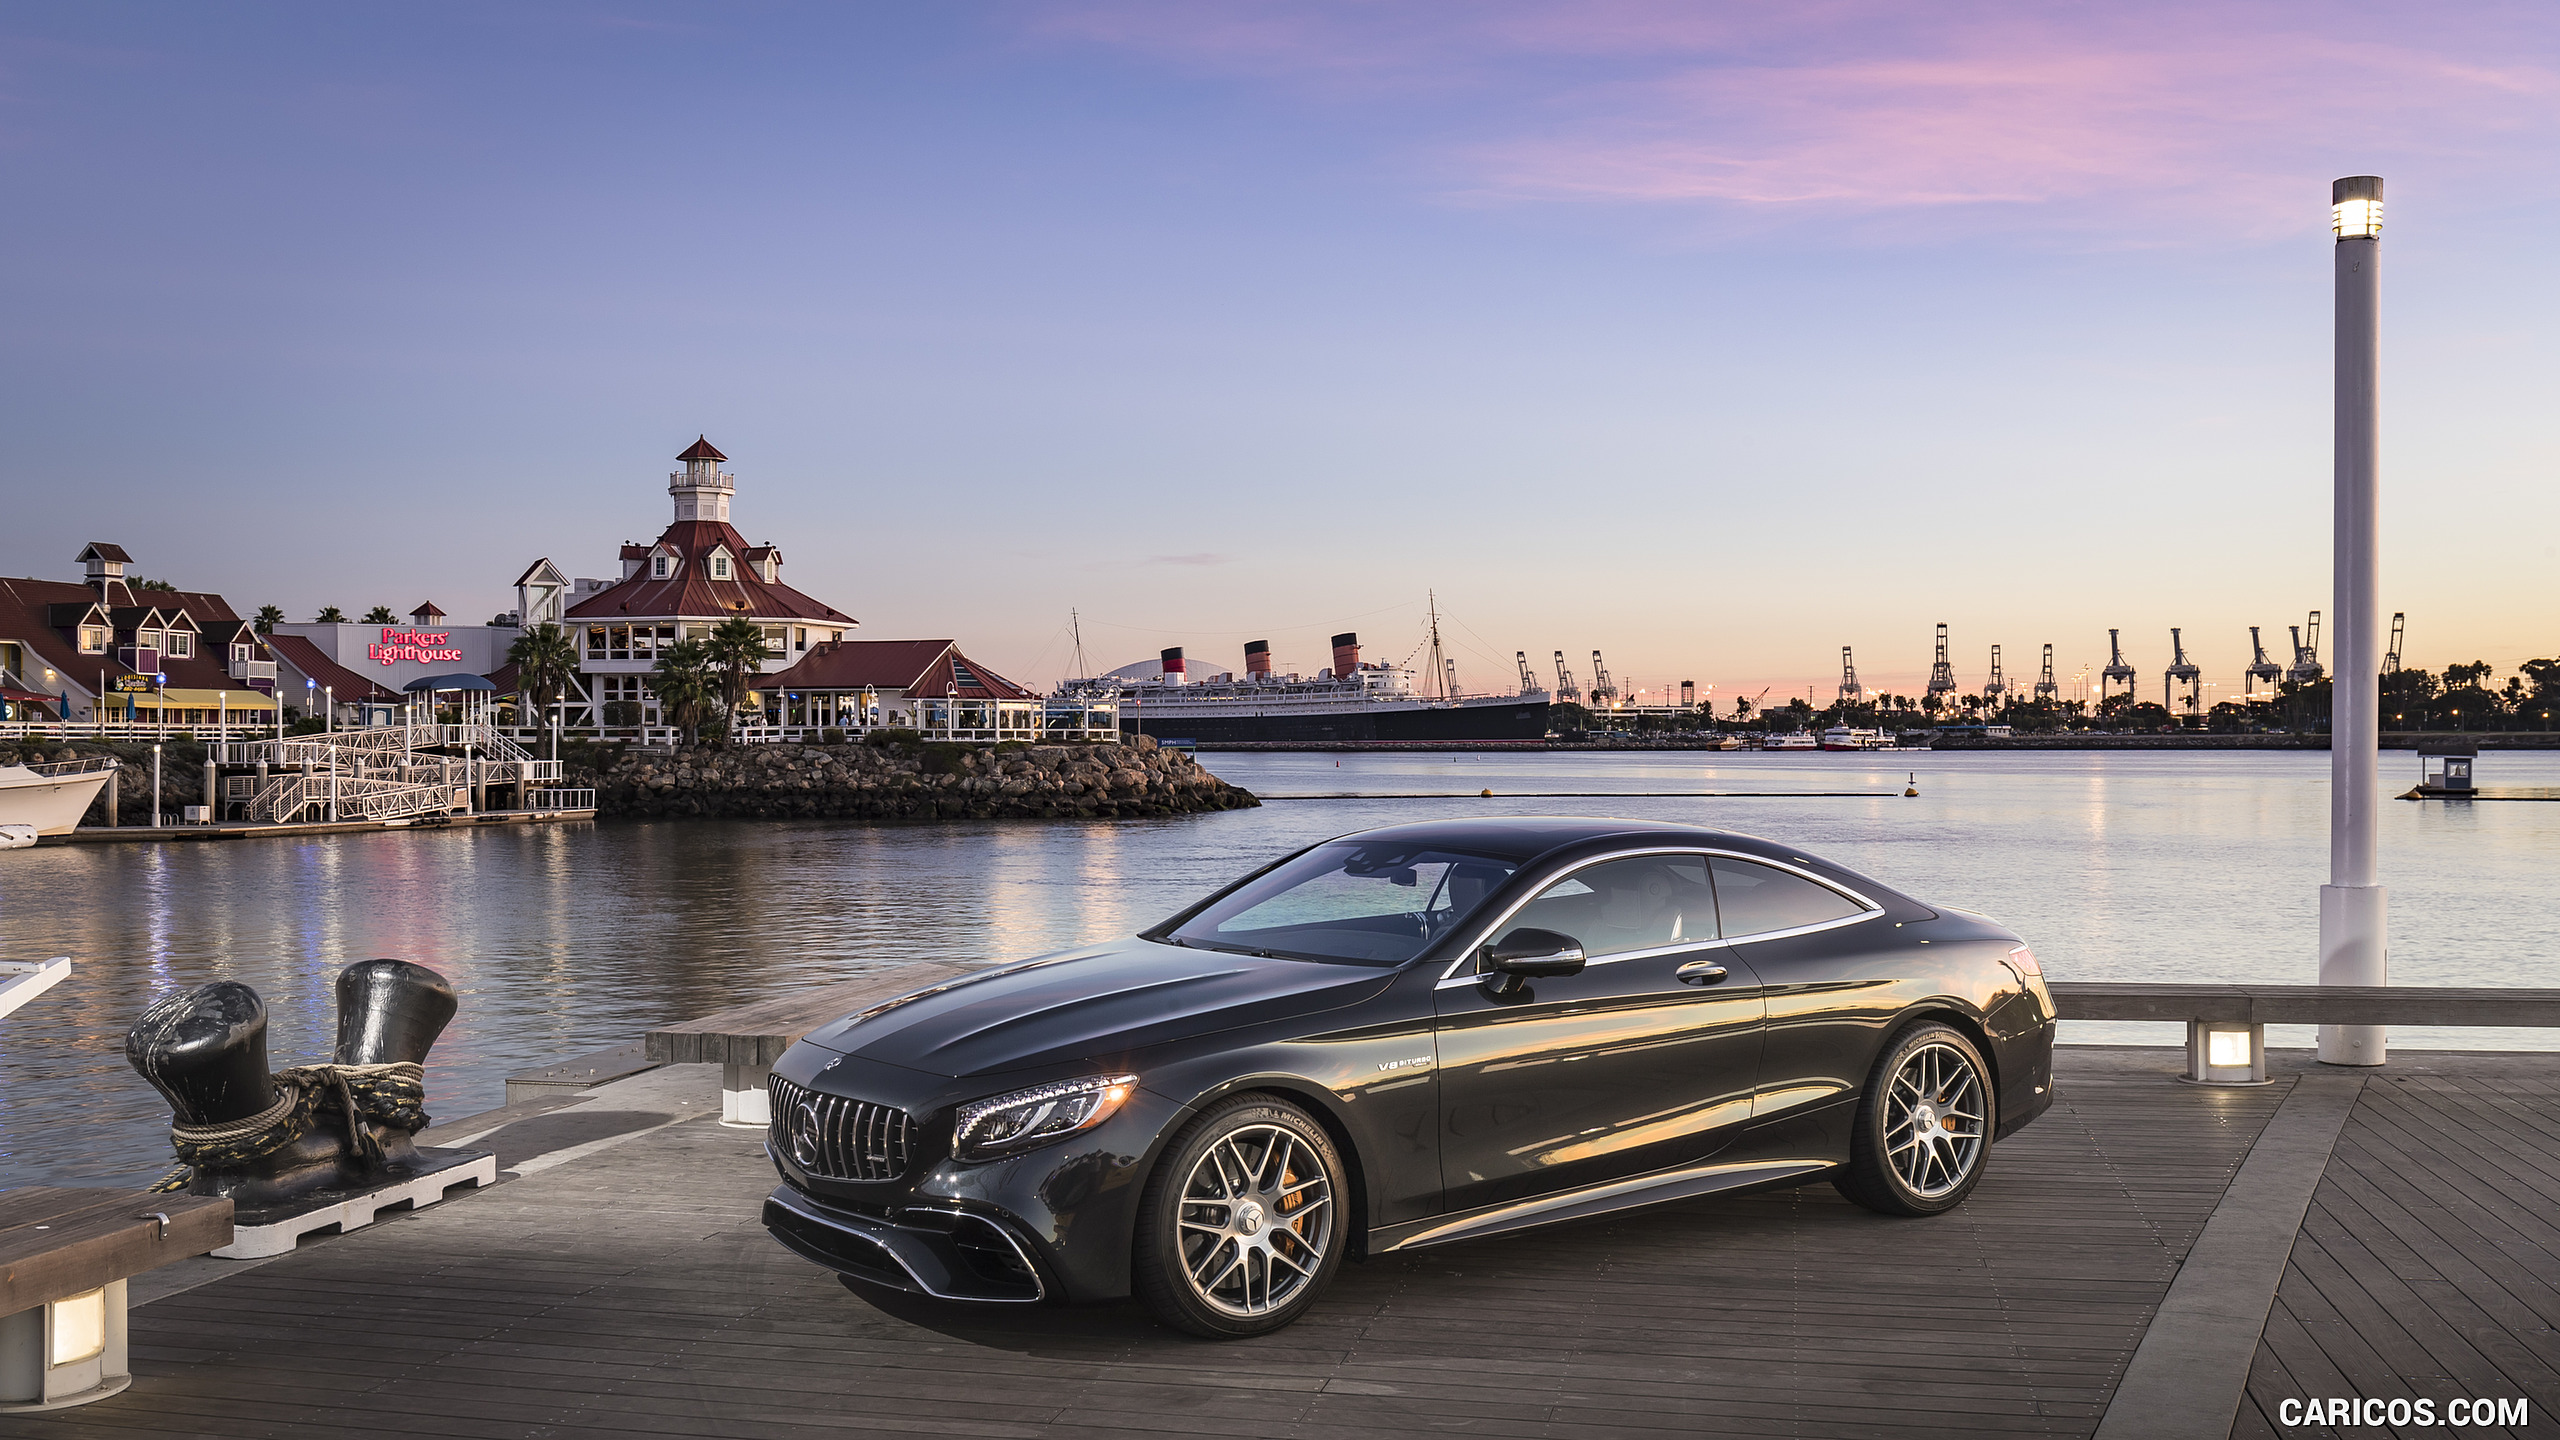 2018 Mercedes-AMG S63 Coupe (US-Spec) - Front Three-Quarter, #61 of 98